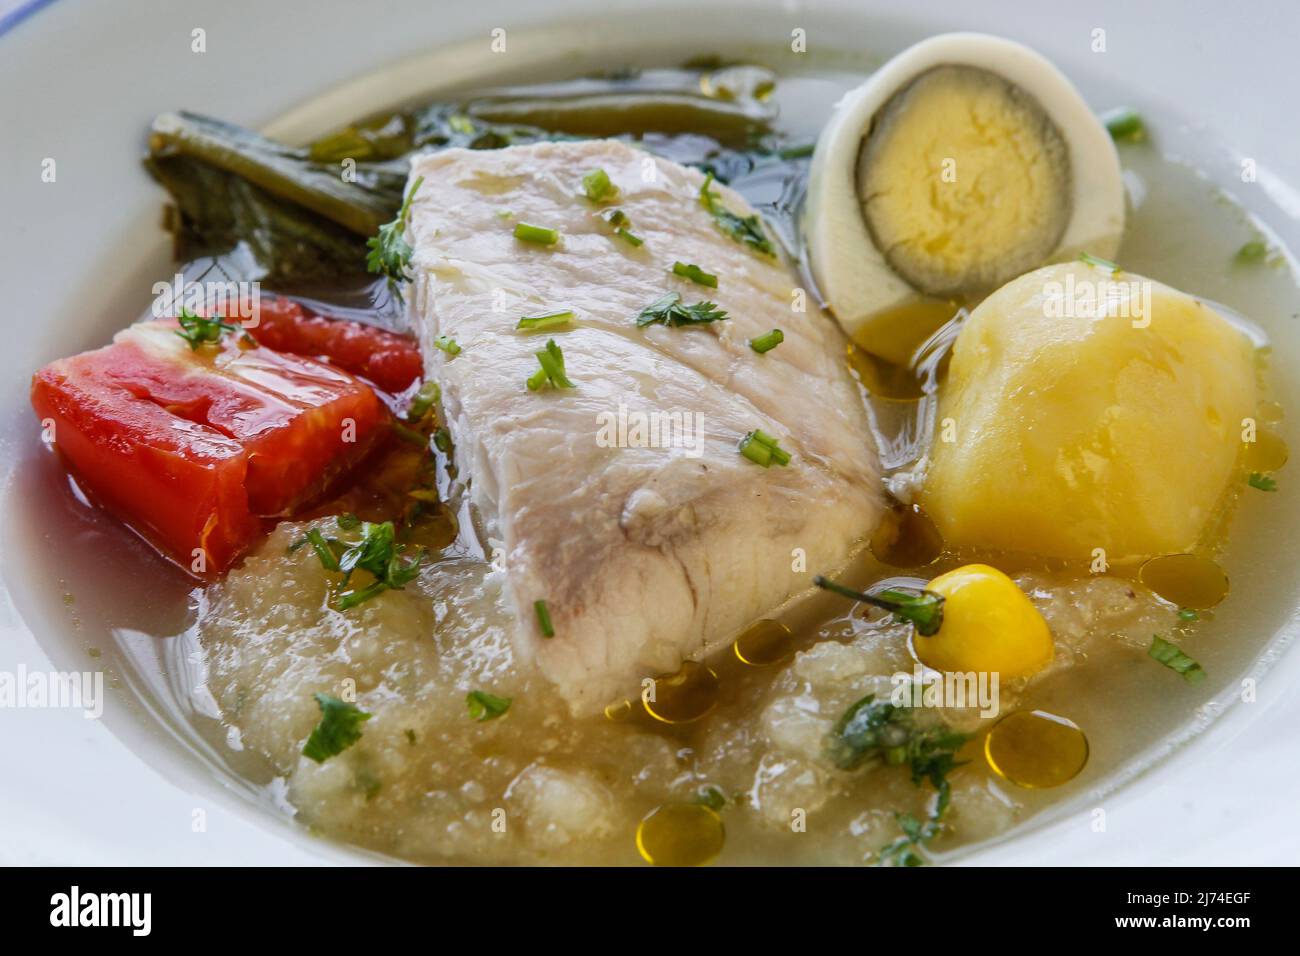 Brazilian dish of Caldeirada de Filhote, a type of Amazonian catfish cooked with vegetables and eggs. Stock Photo